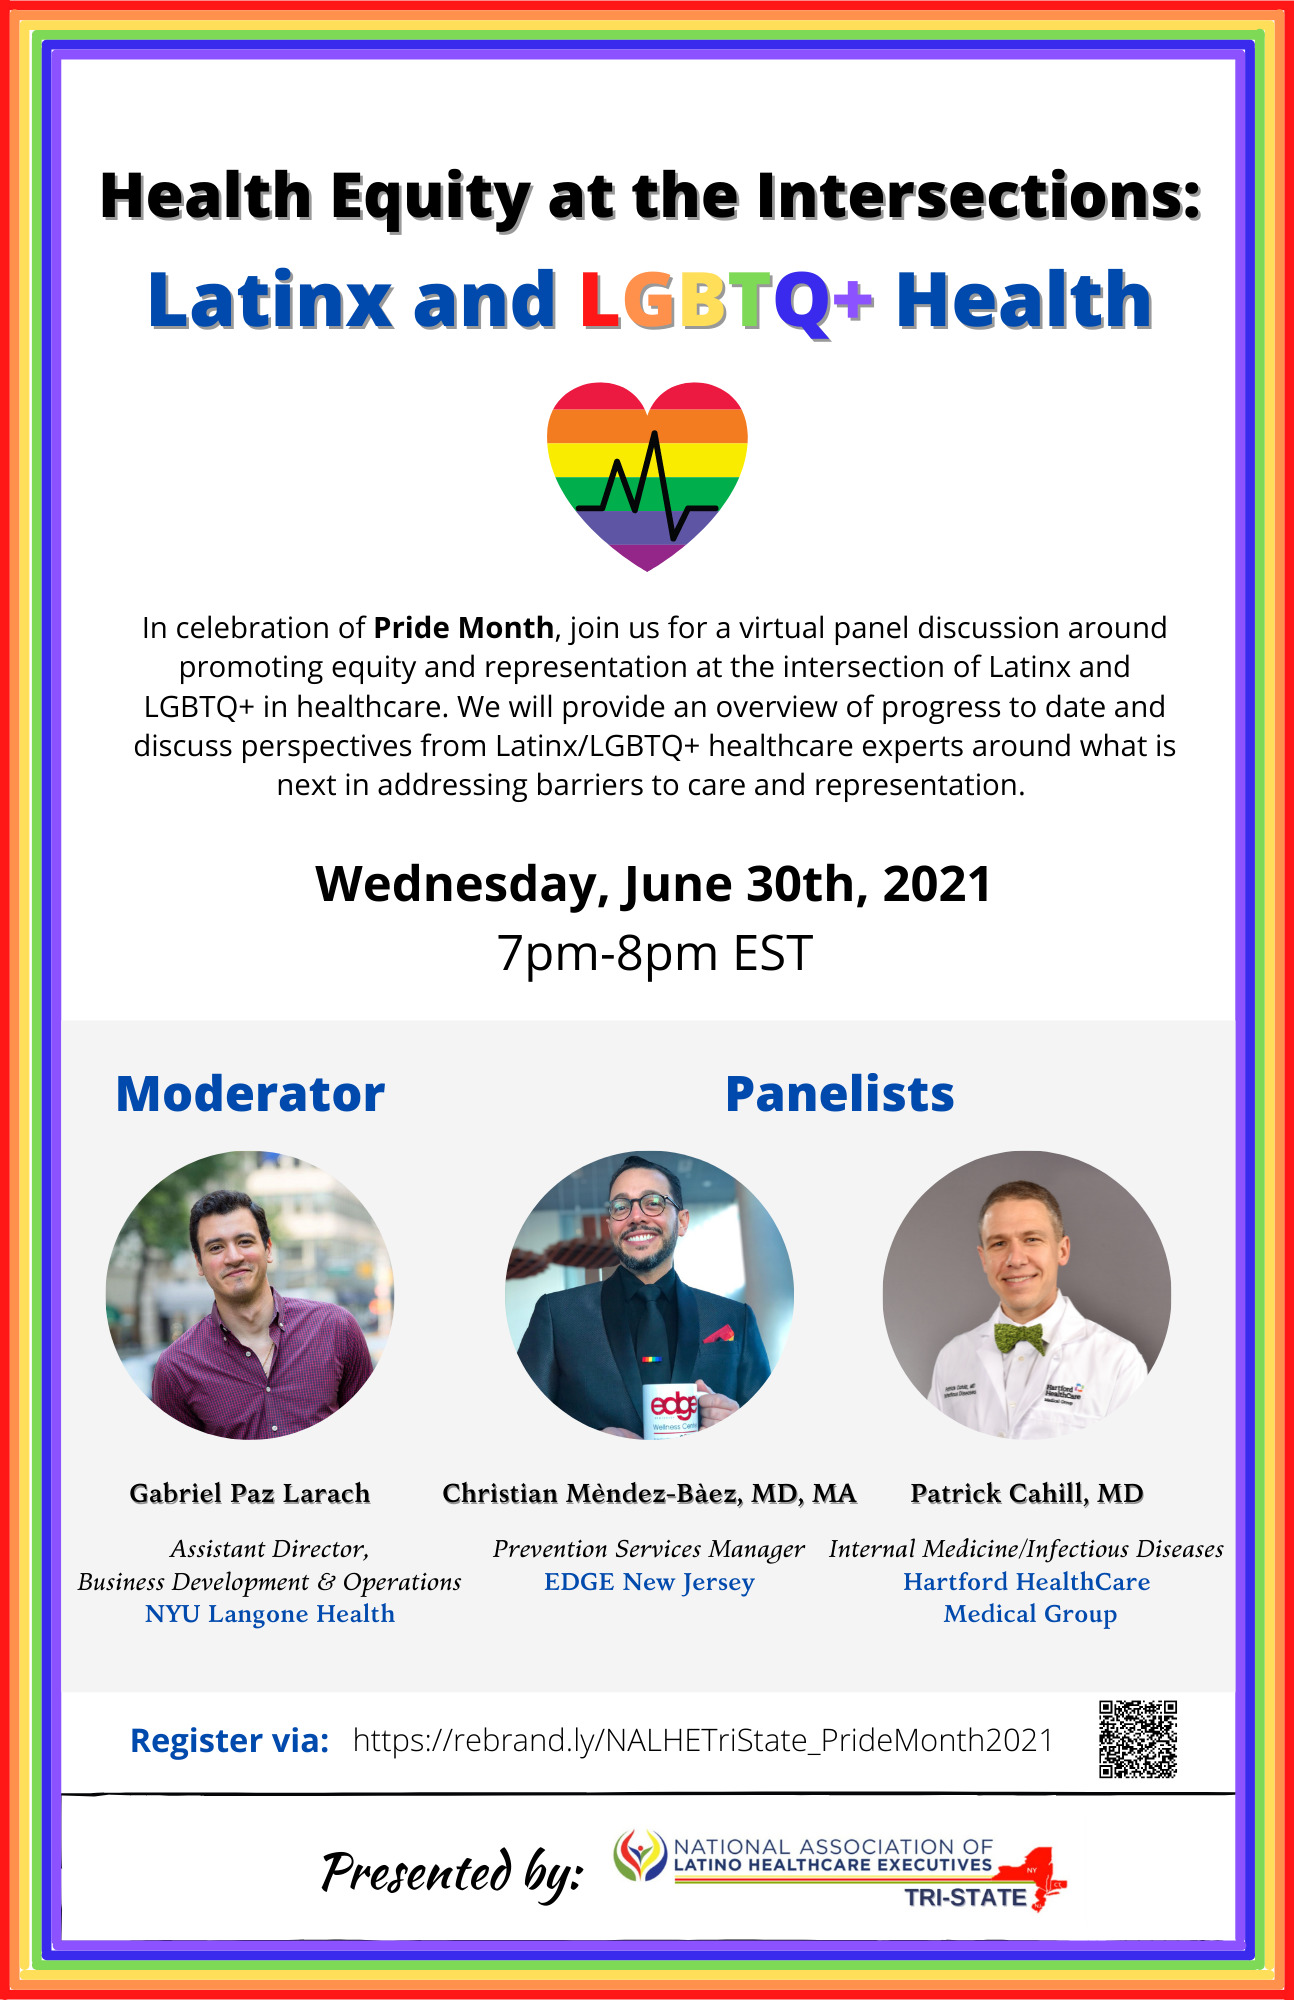 NALHE Tri State Health Equity at the Intersections Latinx and LGBTQ Health 6.30.2021 - Health Equity at the Intersections: Latinx and LGBTQ+ Health